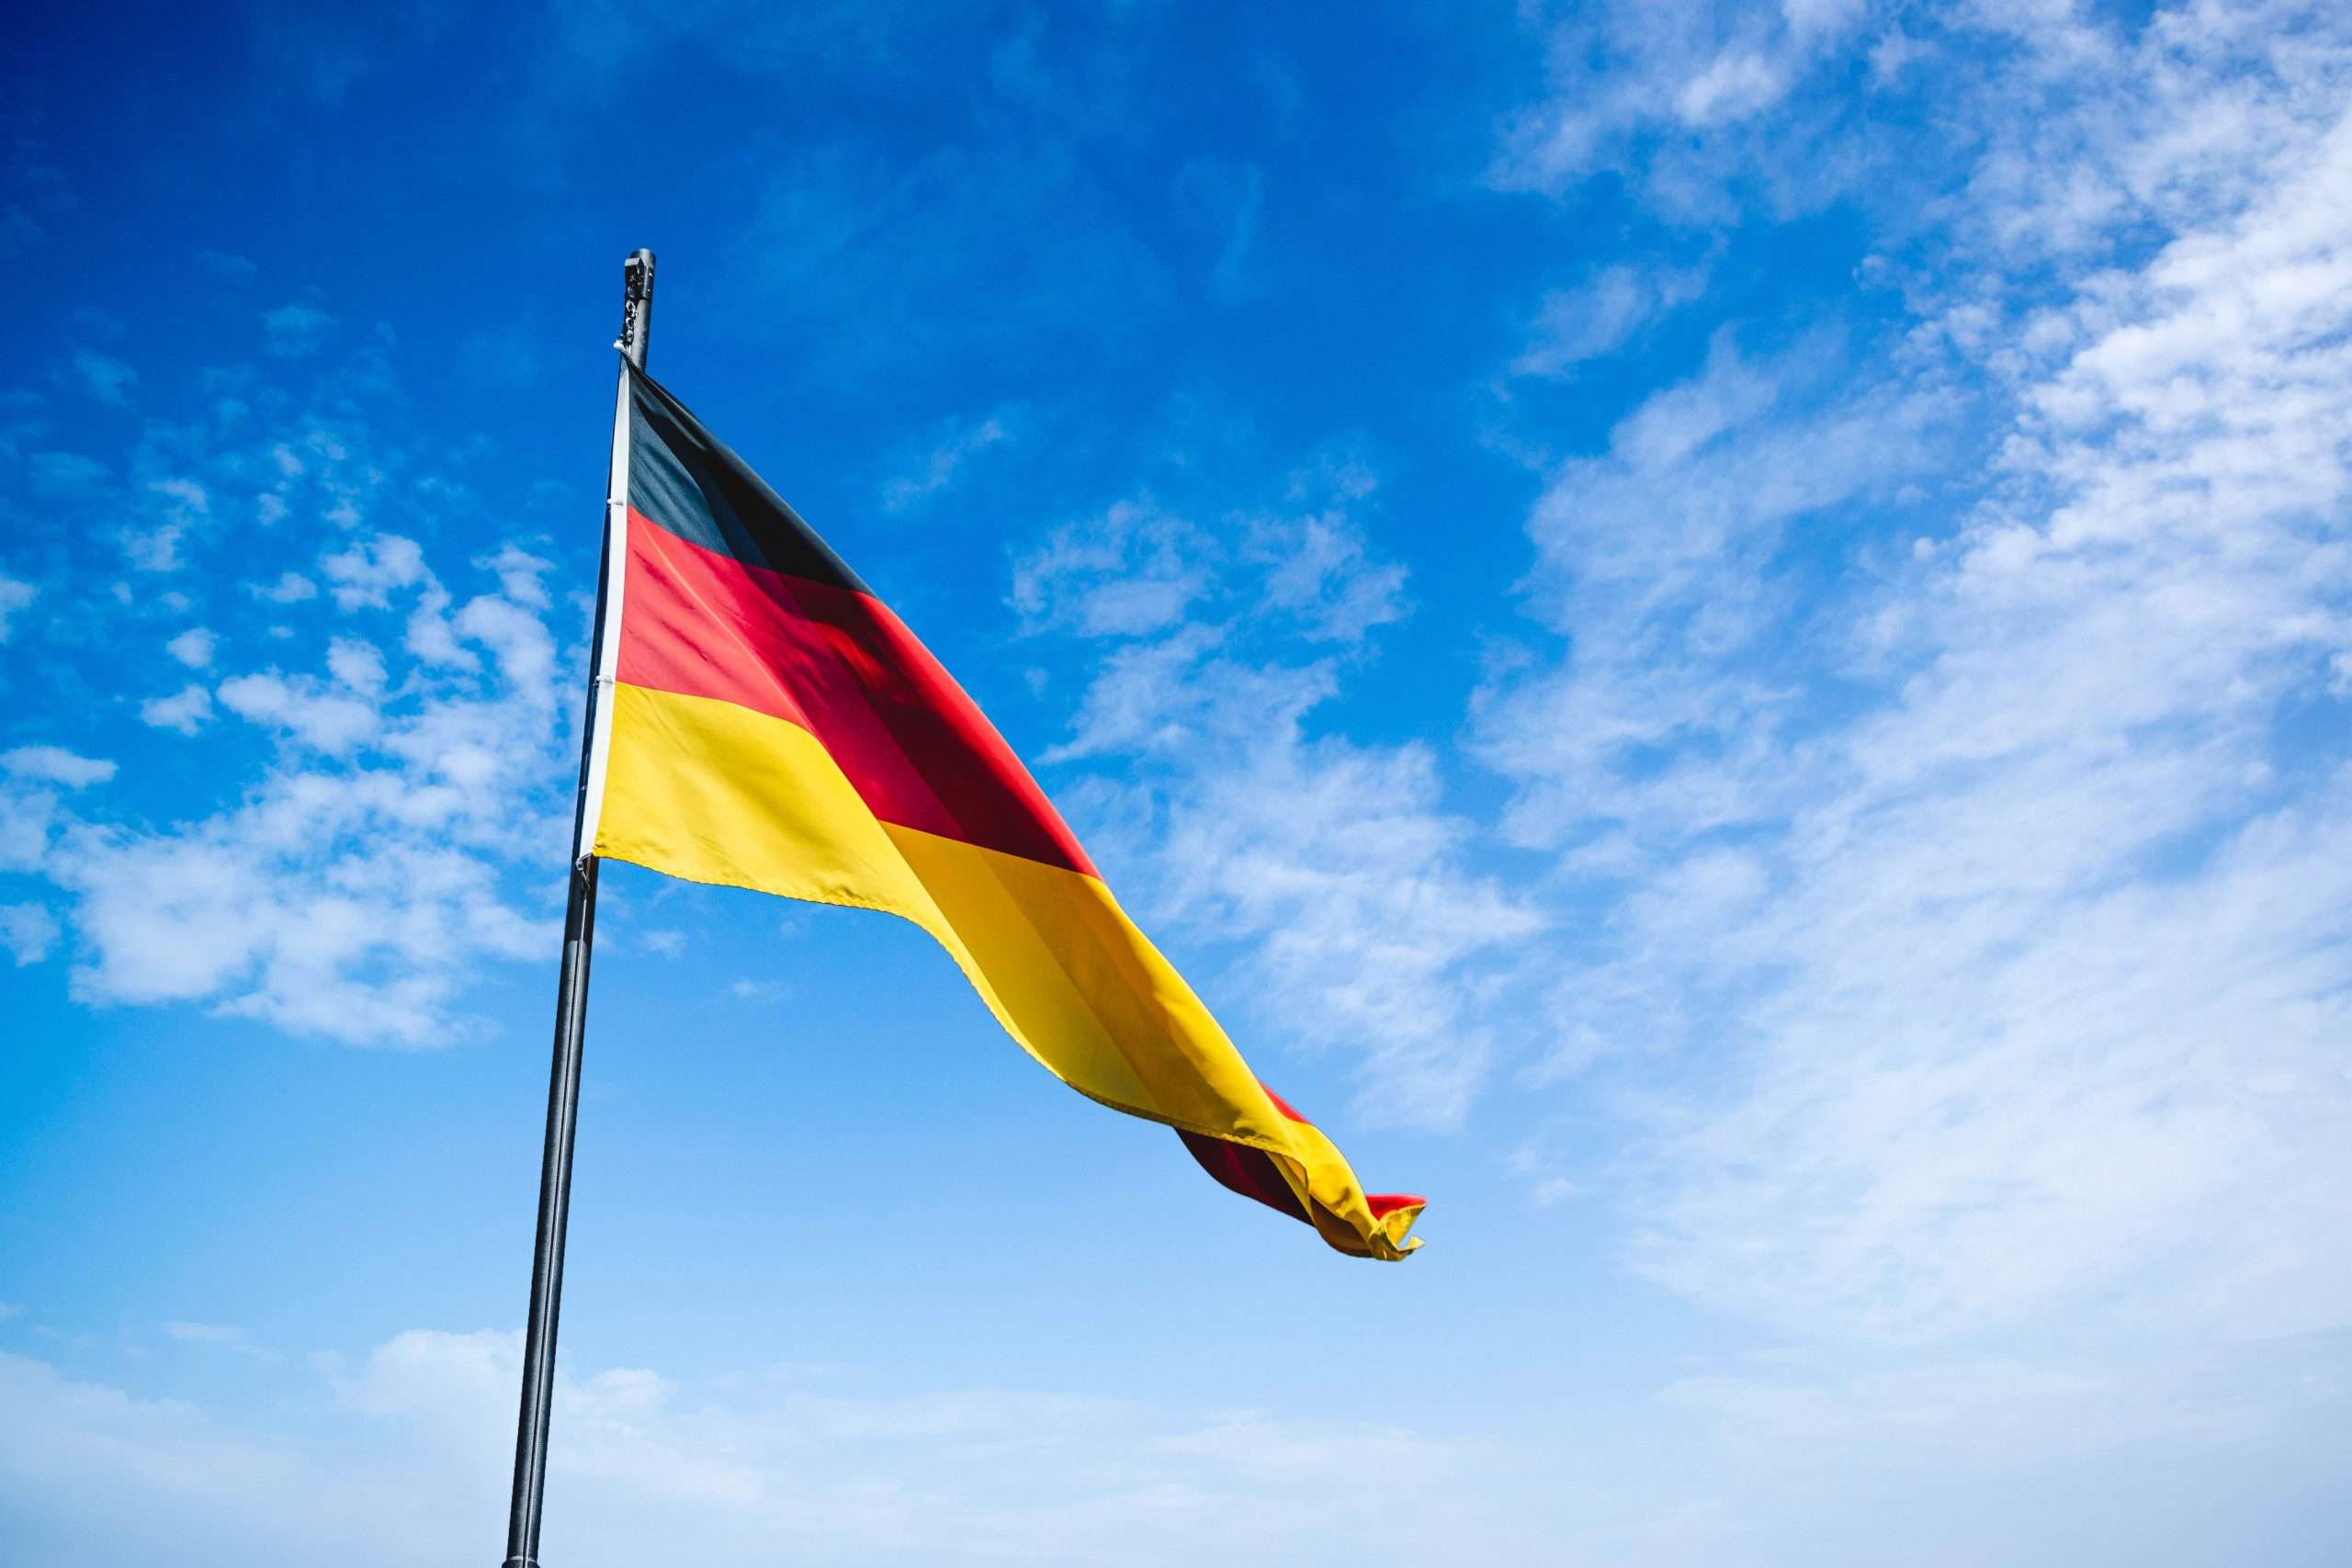 German Bank Dwpbank Makes Launches wpNex, Will Enable 1,200 Banks to Trade in Bitcoin